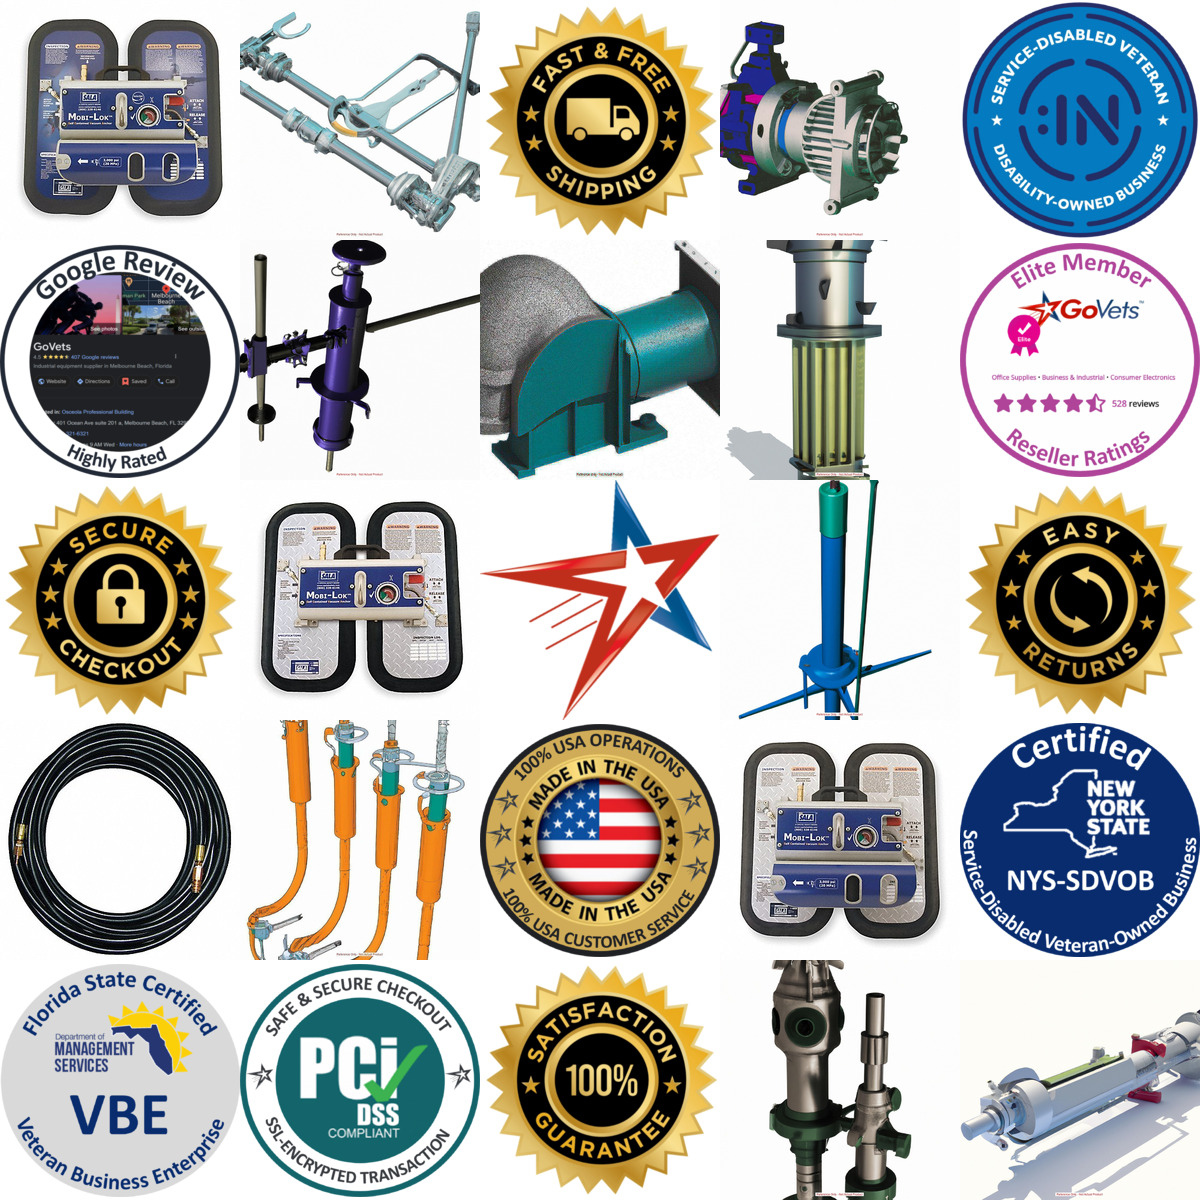 A selection of Vacuum Anchors products on GoVets